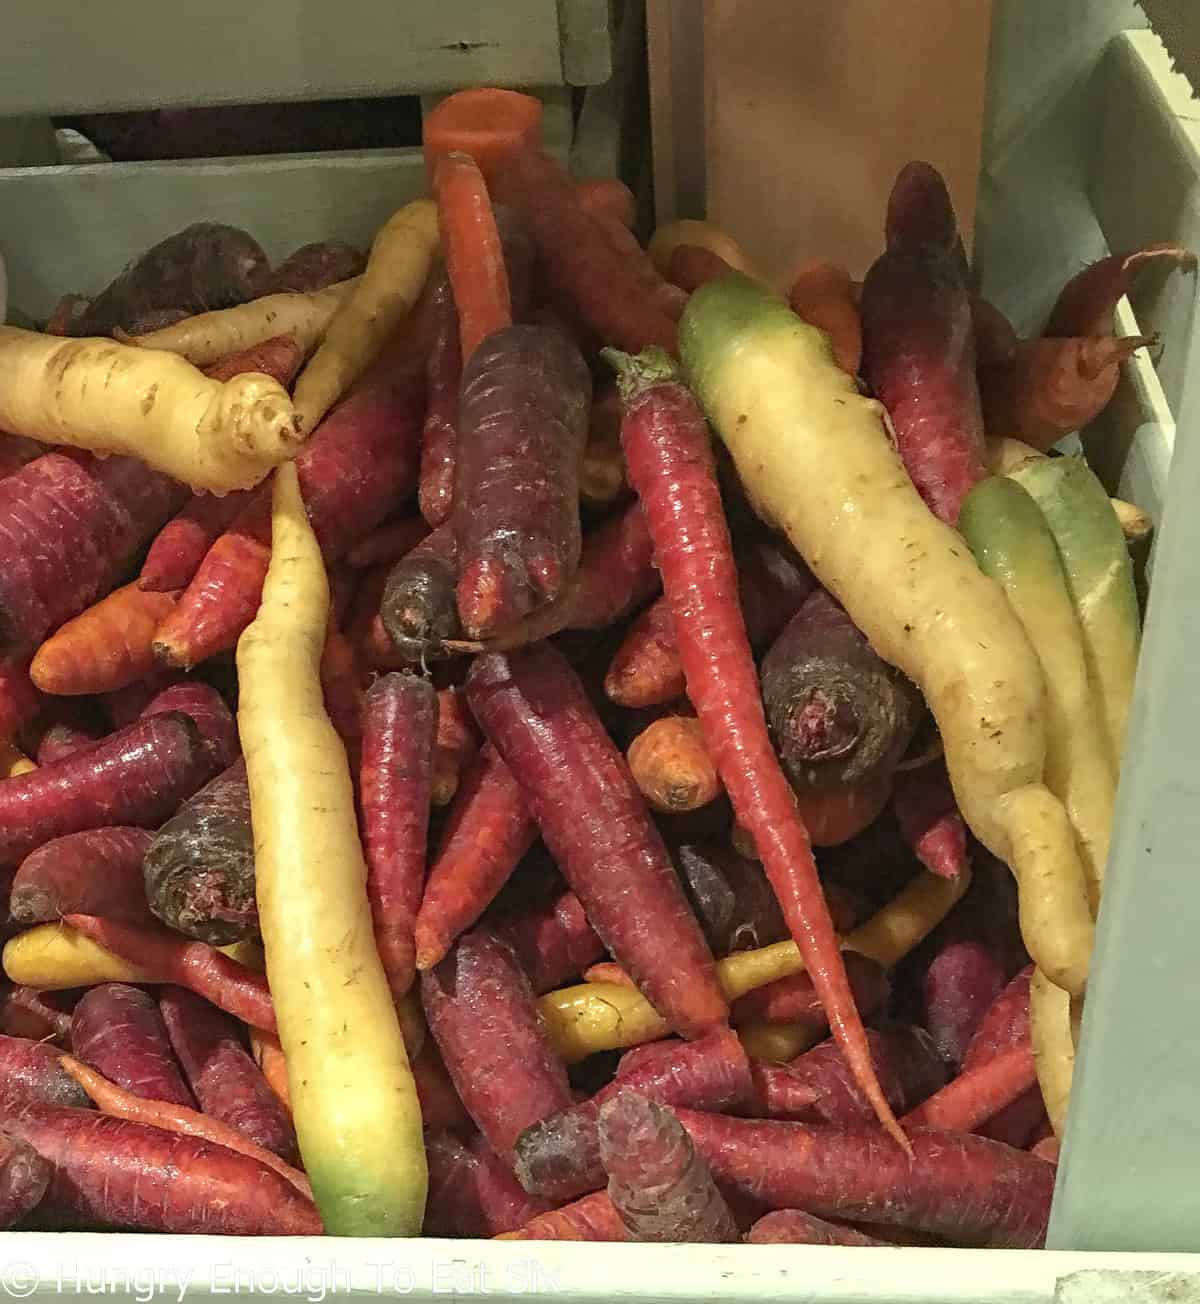 Box of purple, red, and white carrots.